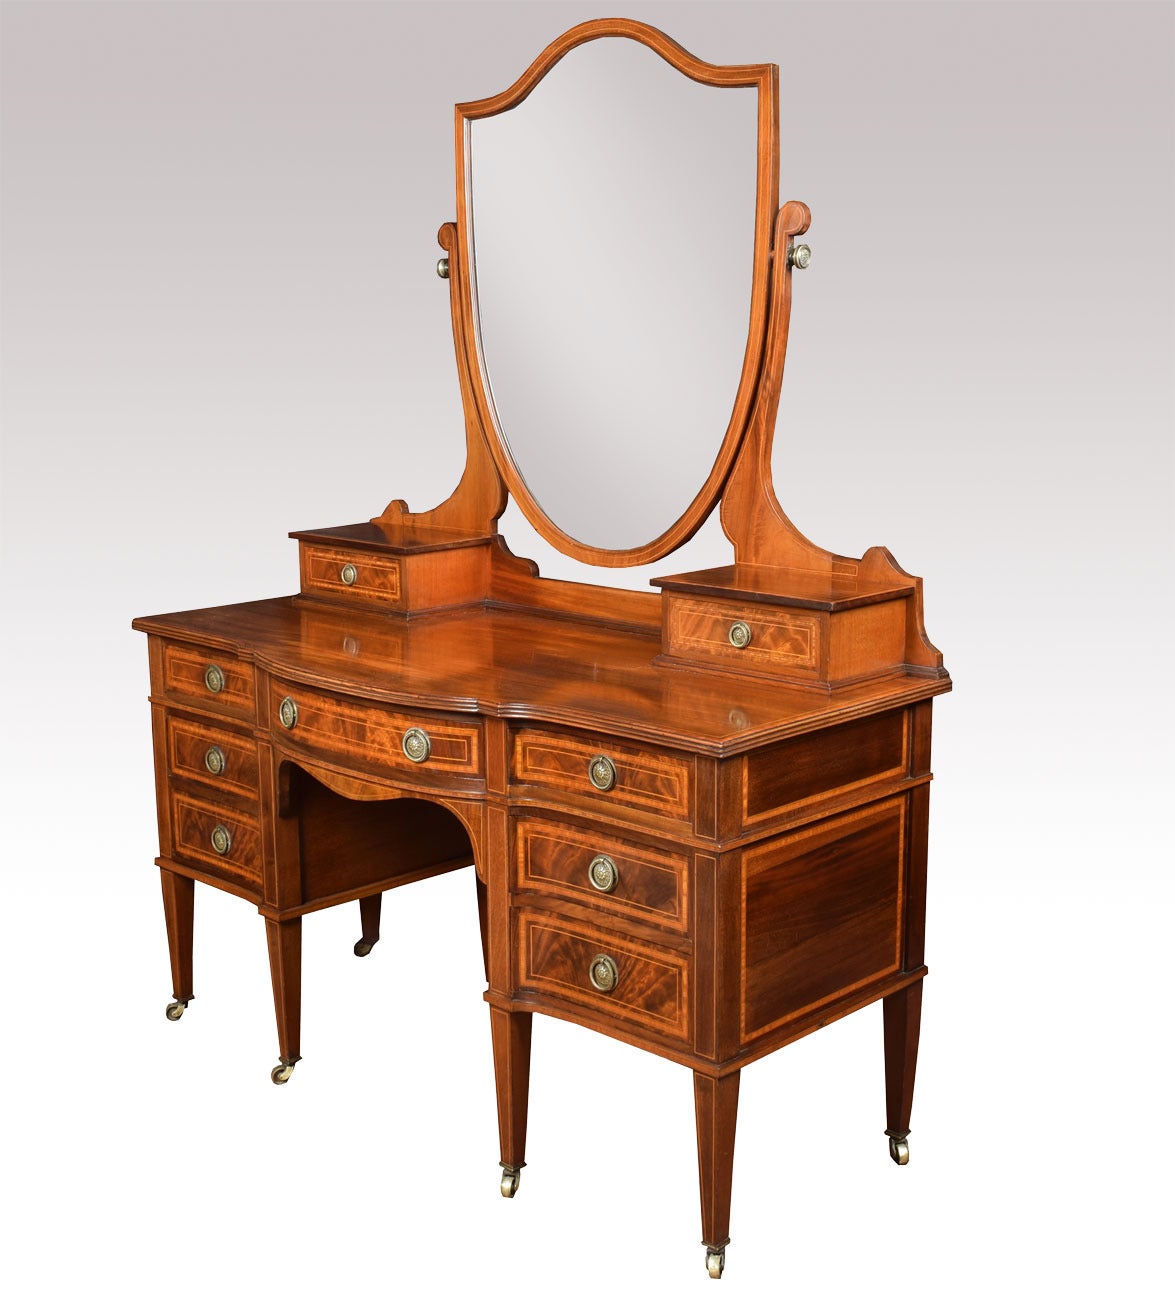 Edwardian mahogany dressing table by Maple & Co. the shield shaped mirror Flanked by one short draw to each side above figured mahogany top. The base section fitted with central draw having brass tooled handles with three further draws to either